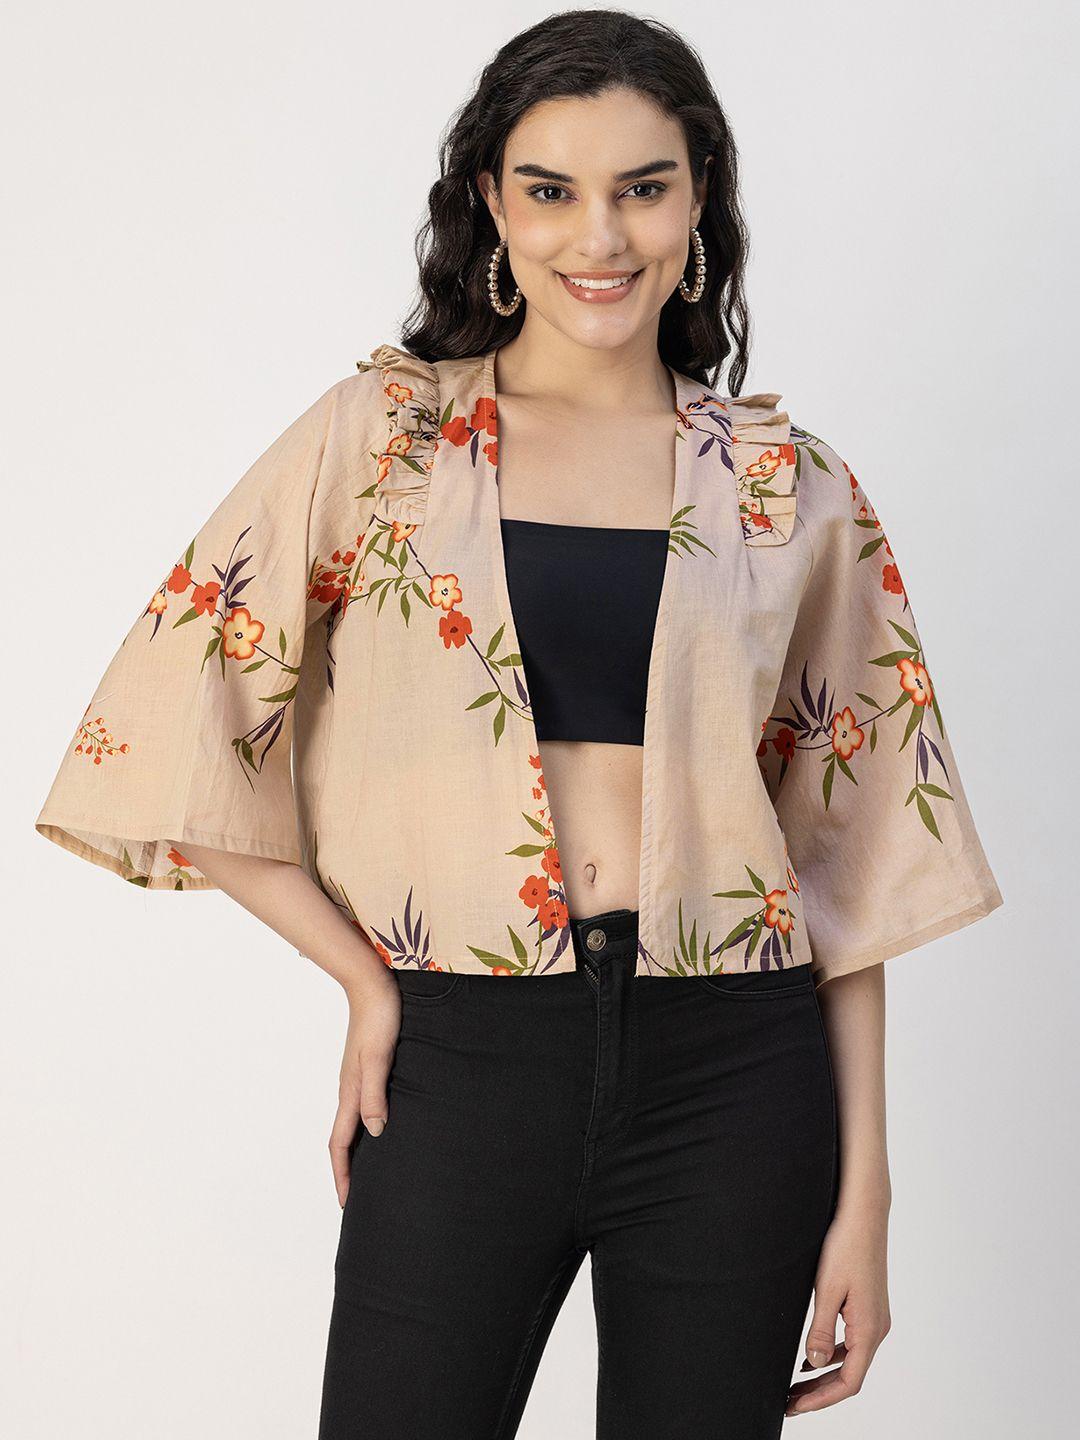 moomaya women beige floral lightweight crop open front jacket with embroidered